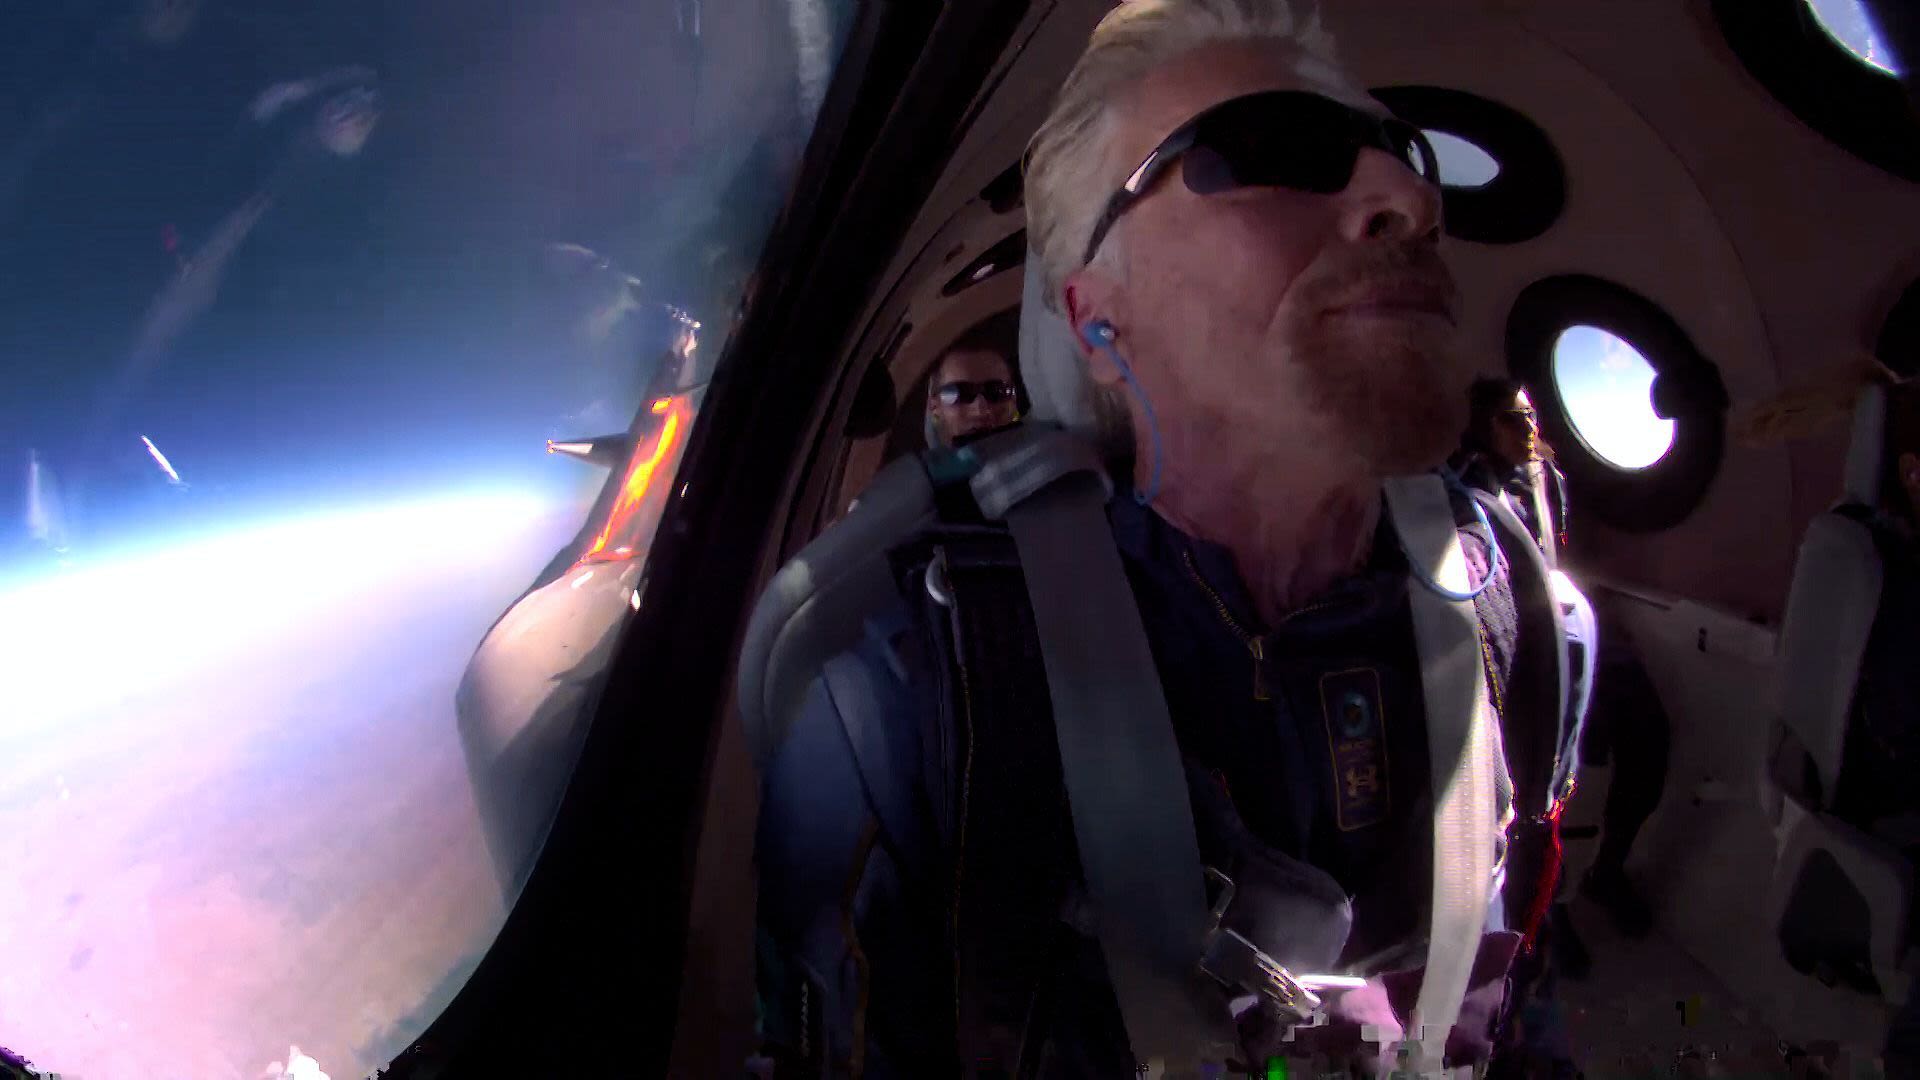 Richard Branson onboard VSS Unity during the Unity 22 mission